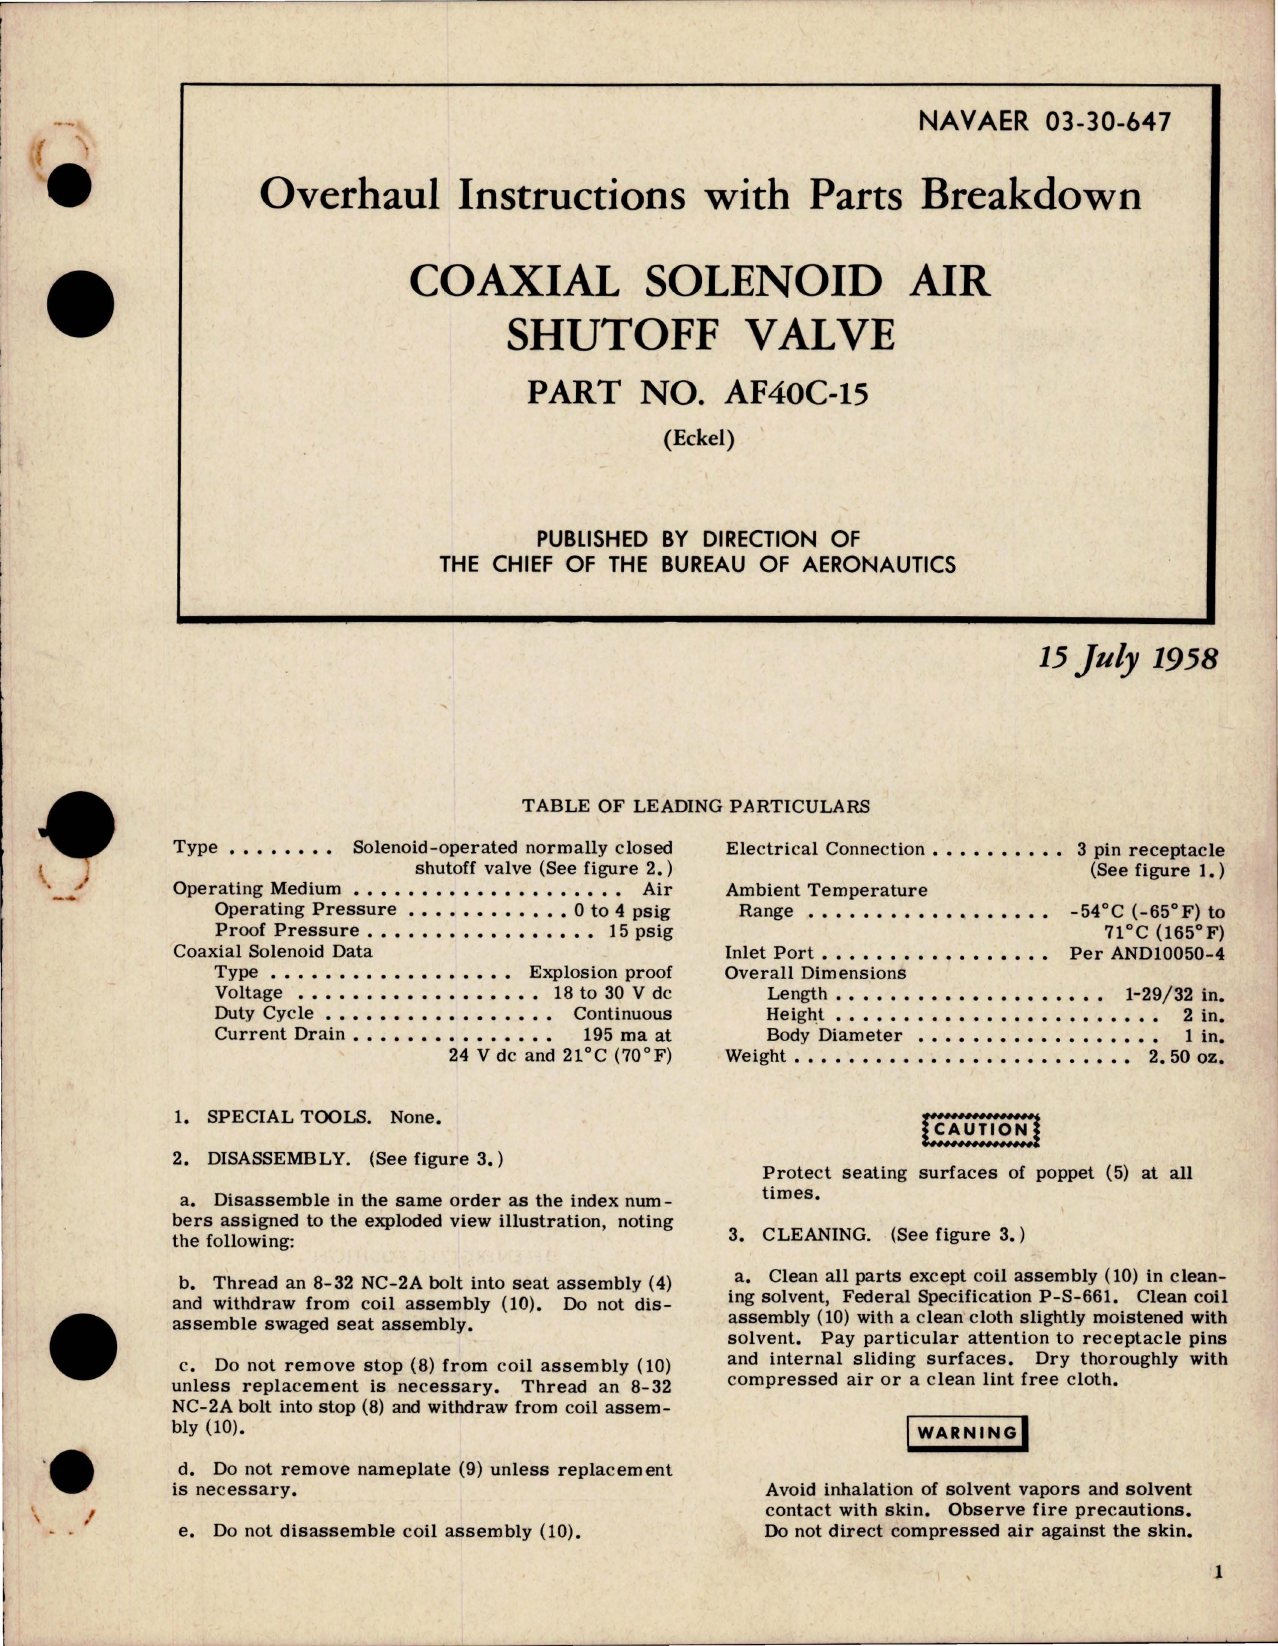 Sample page 1 from AirCorps Library document: Overhaul Instructions with Parts for Coaxial Solenoid Air Shutoff Valve - Part AF40C-15 